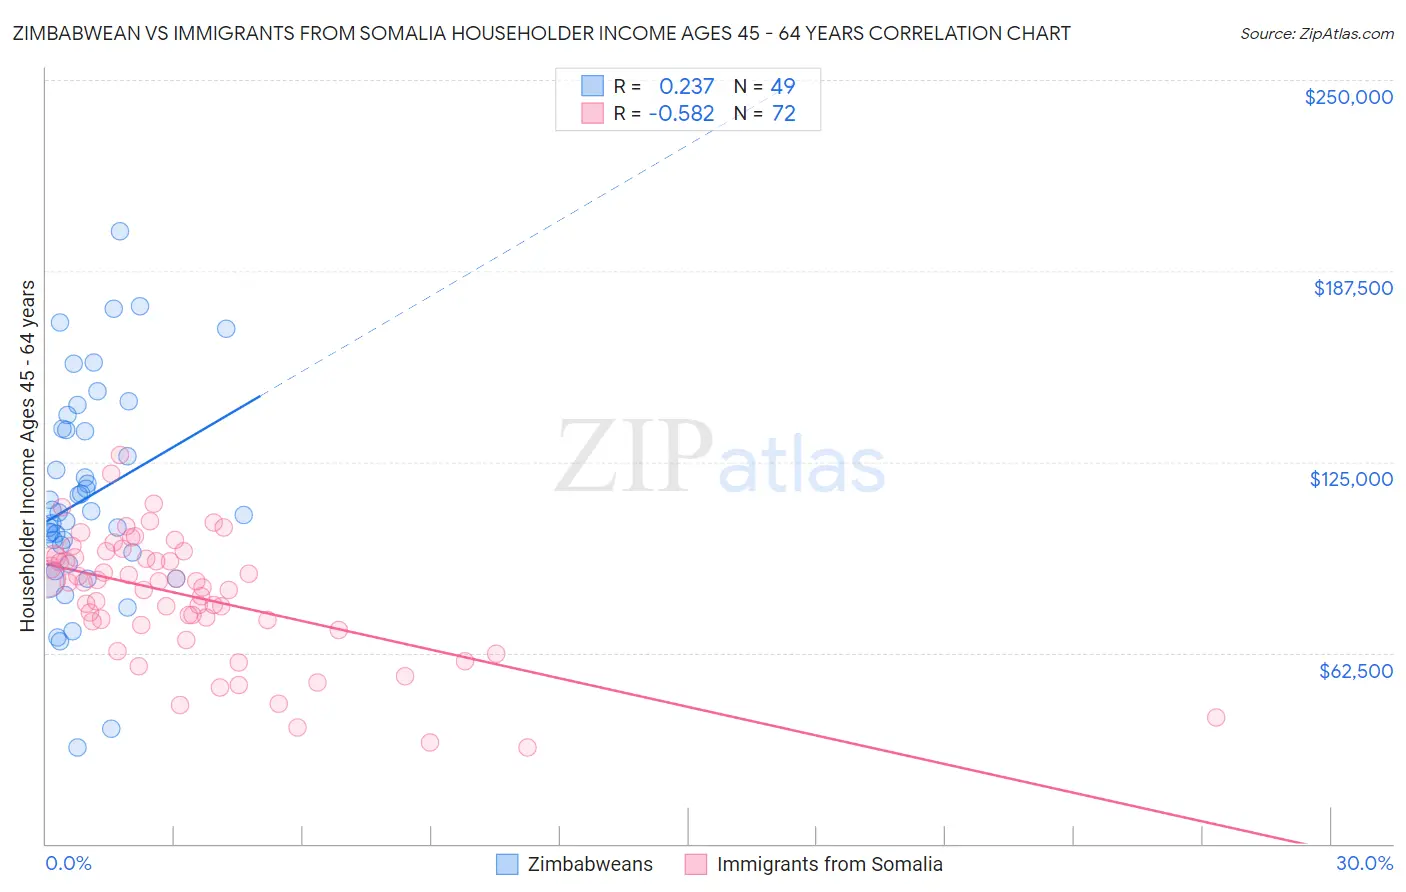 Zimbabwean vs Immigrants from Somalia Householder Income Ages 45 - 64 years